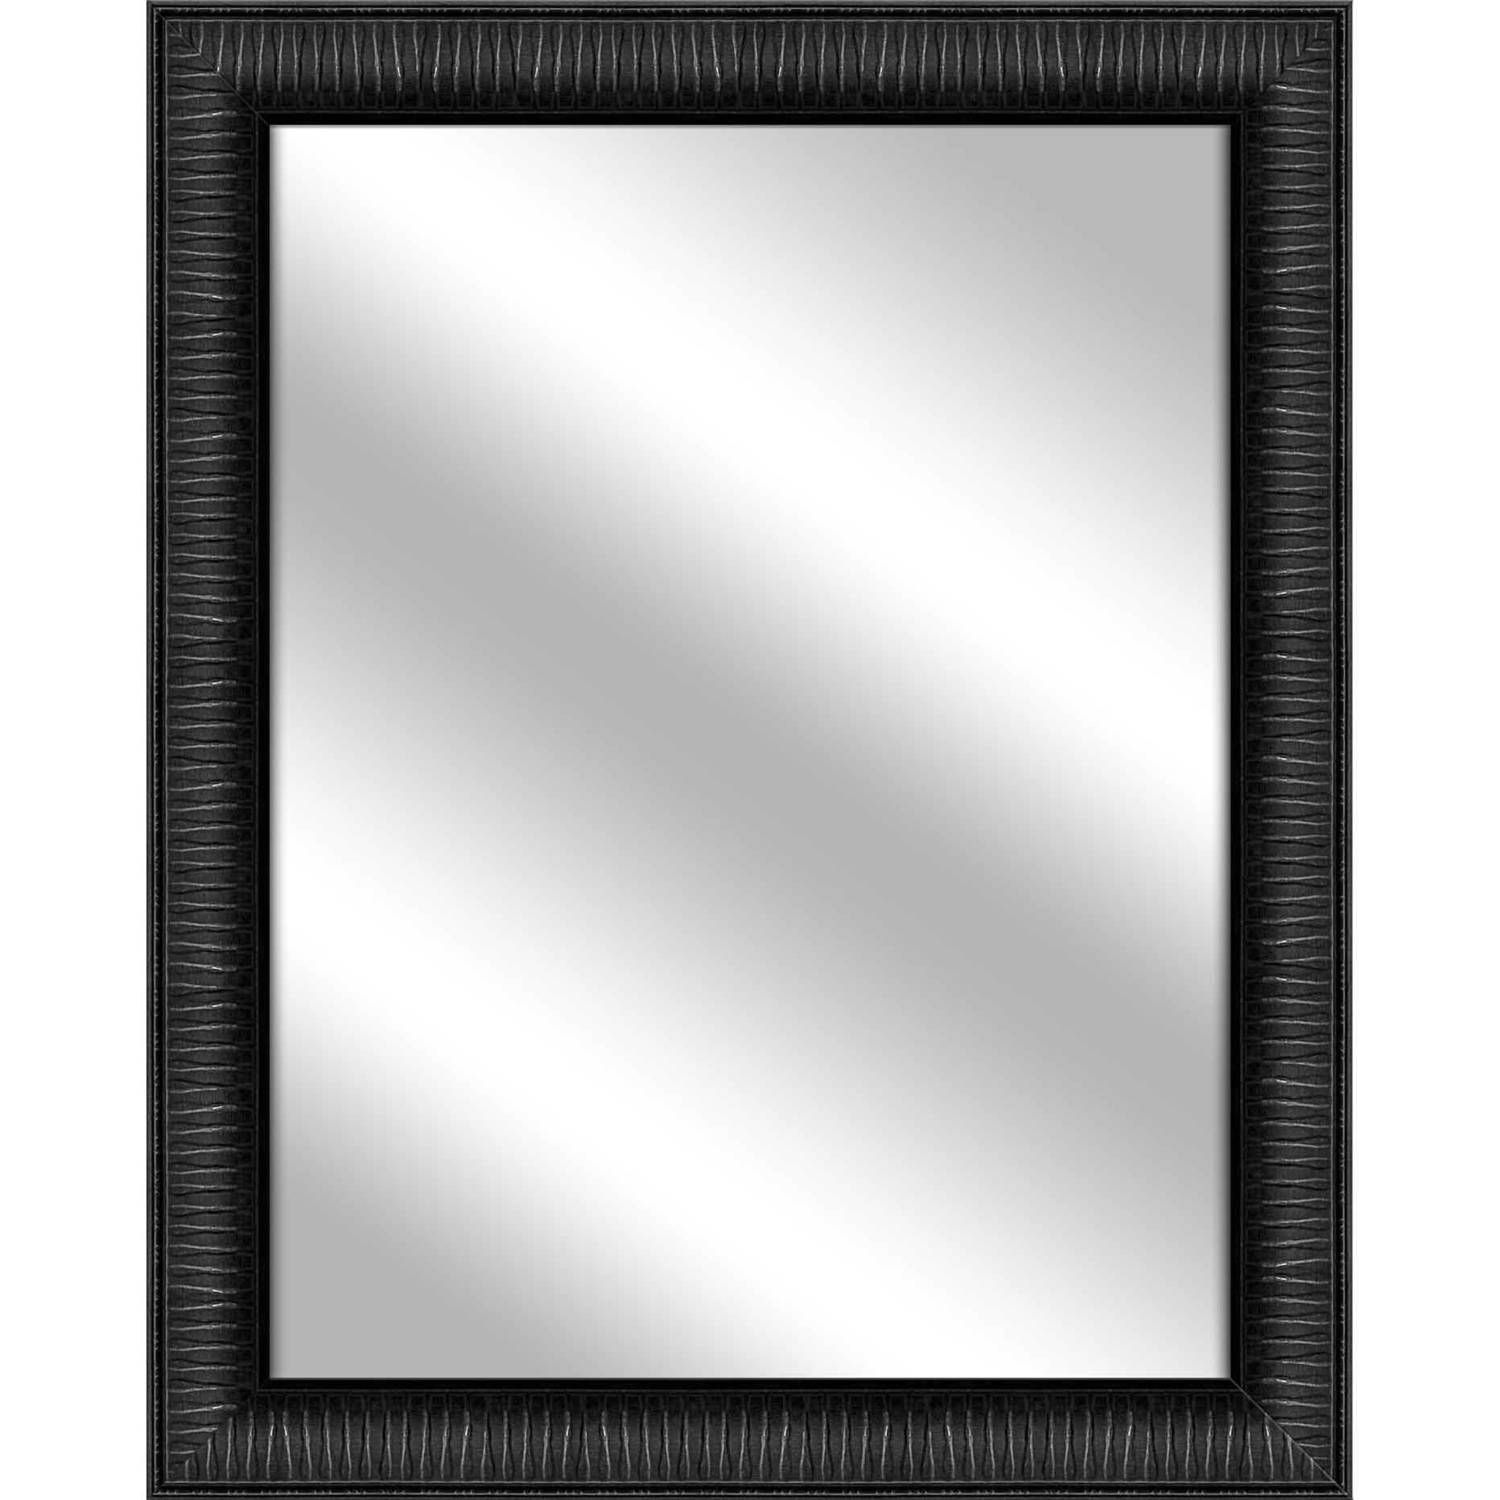 Ptm Images Forte Ready To Hang Framed Mirror, Wood Grain Black Within Black Wood Wall Mirrors (View 8 of 15)